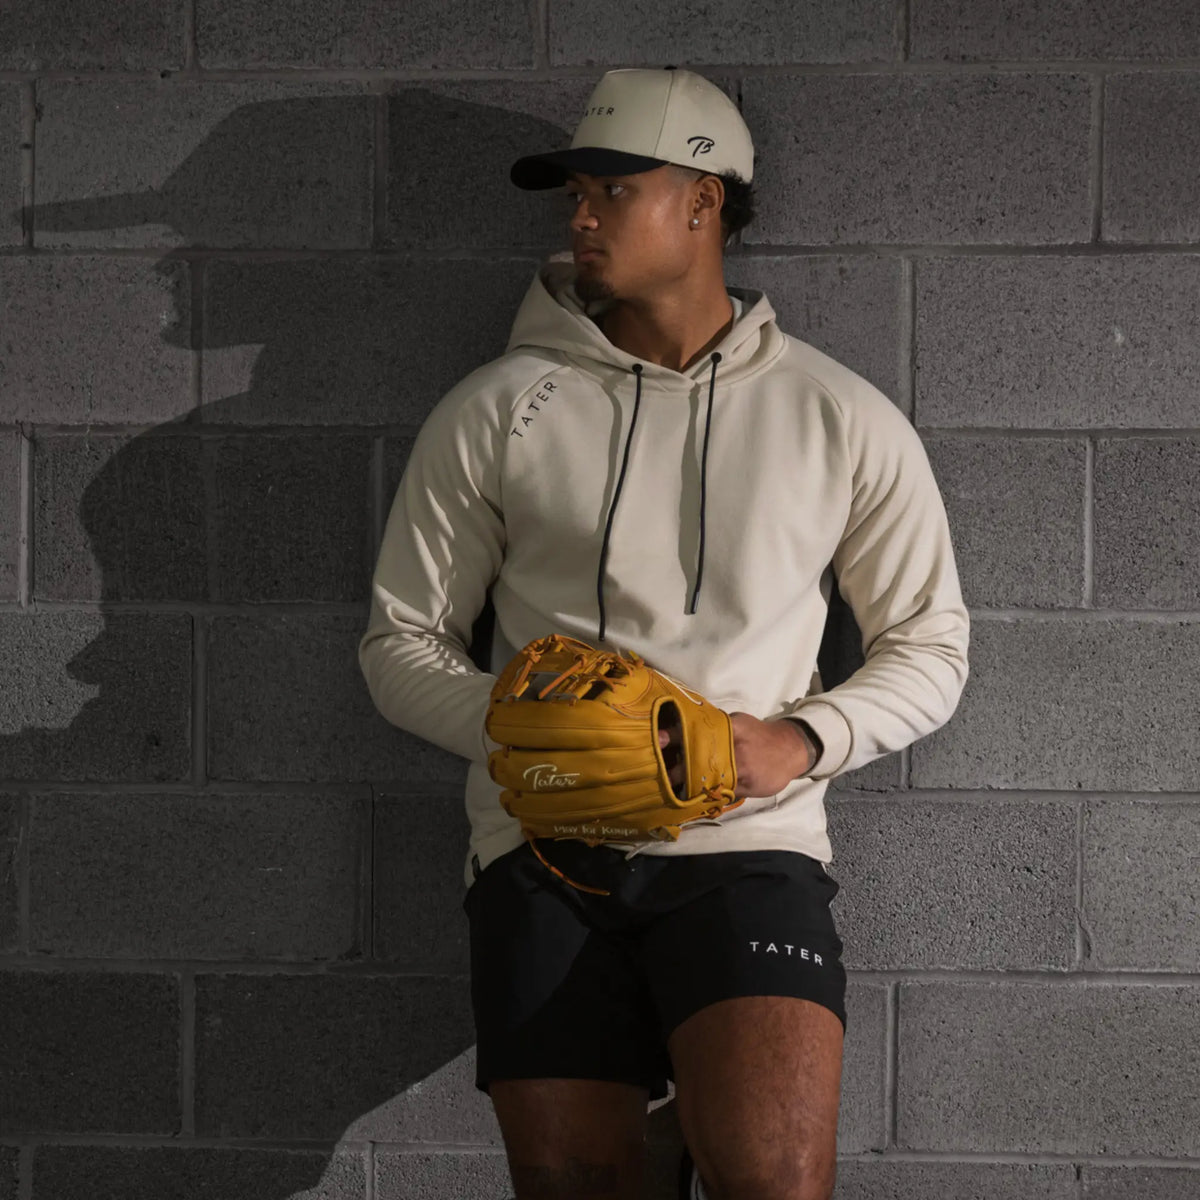 The uploaded image shows a college baseball player posed against a textured wall, capturing a strong athletic stance. The player is outfitted in TATER baseball brand gear, wearing a cream-colored hoodie with the TATER logo prominently displayed on the side, black athletic shorts also bearing the TATER logo, and a baseball cap with the same branding. He is holding a golden yellow baseball glove, adding a vibrant contrast to the neutral tones of the apparel. 